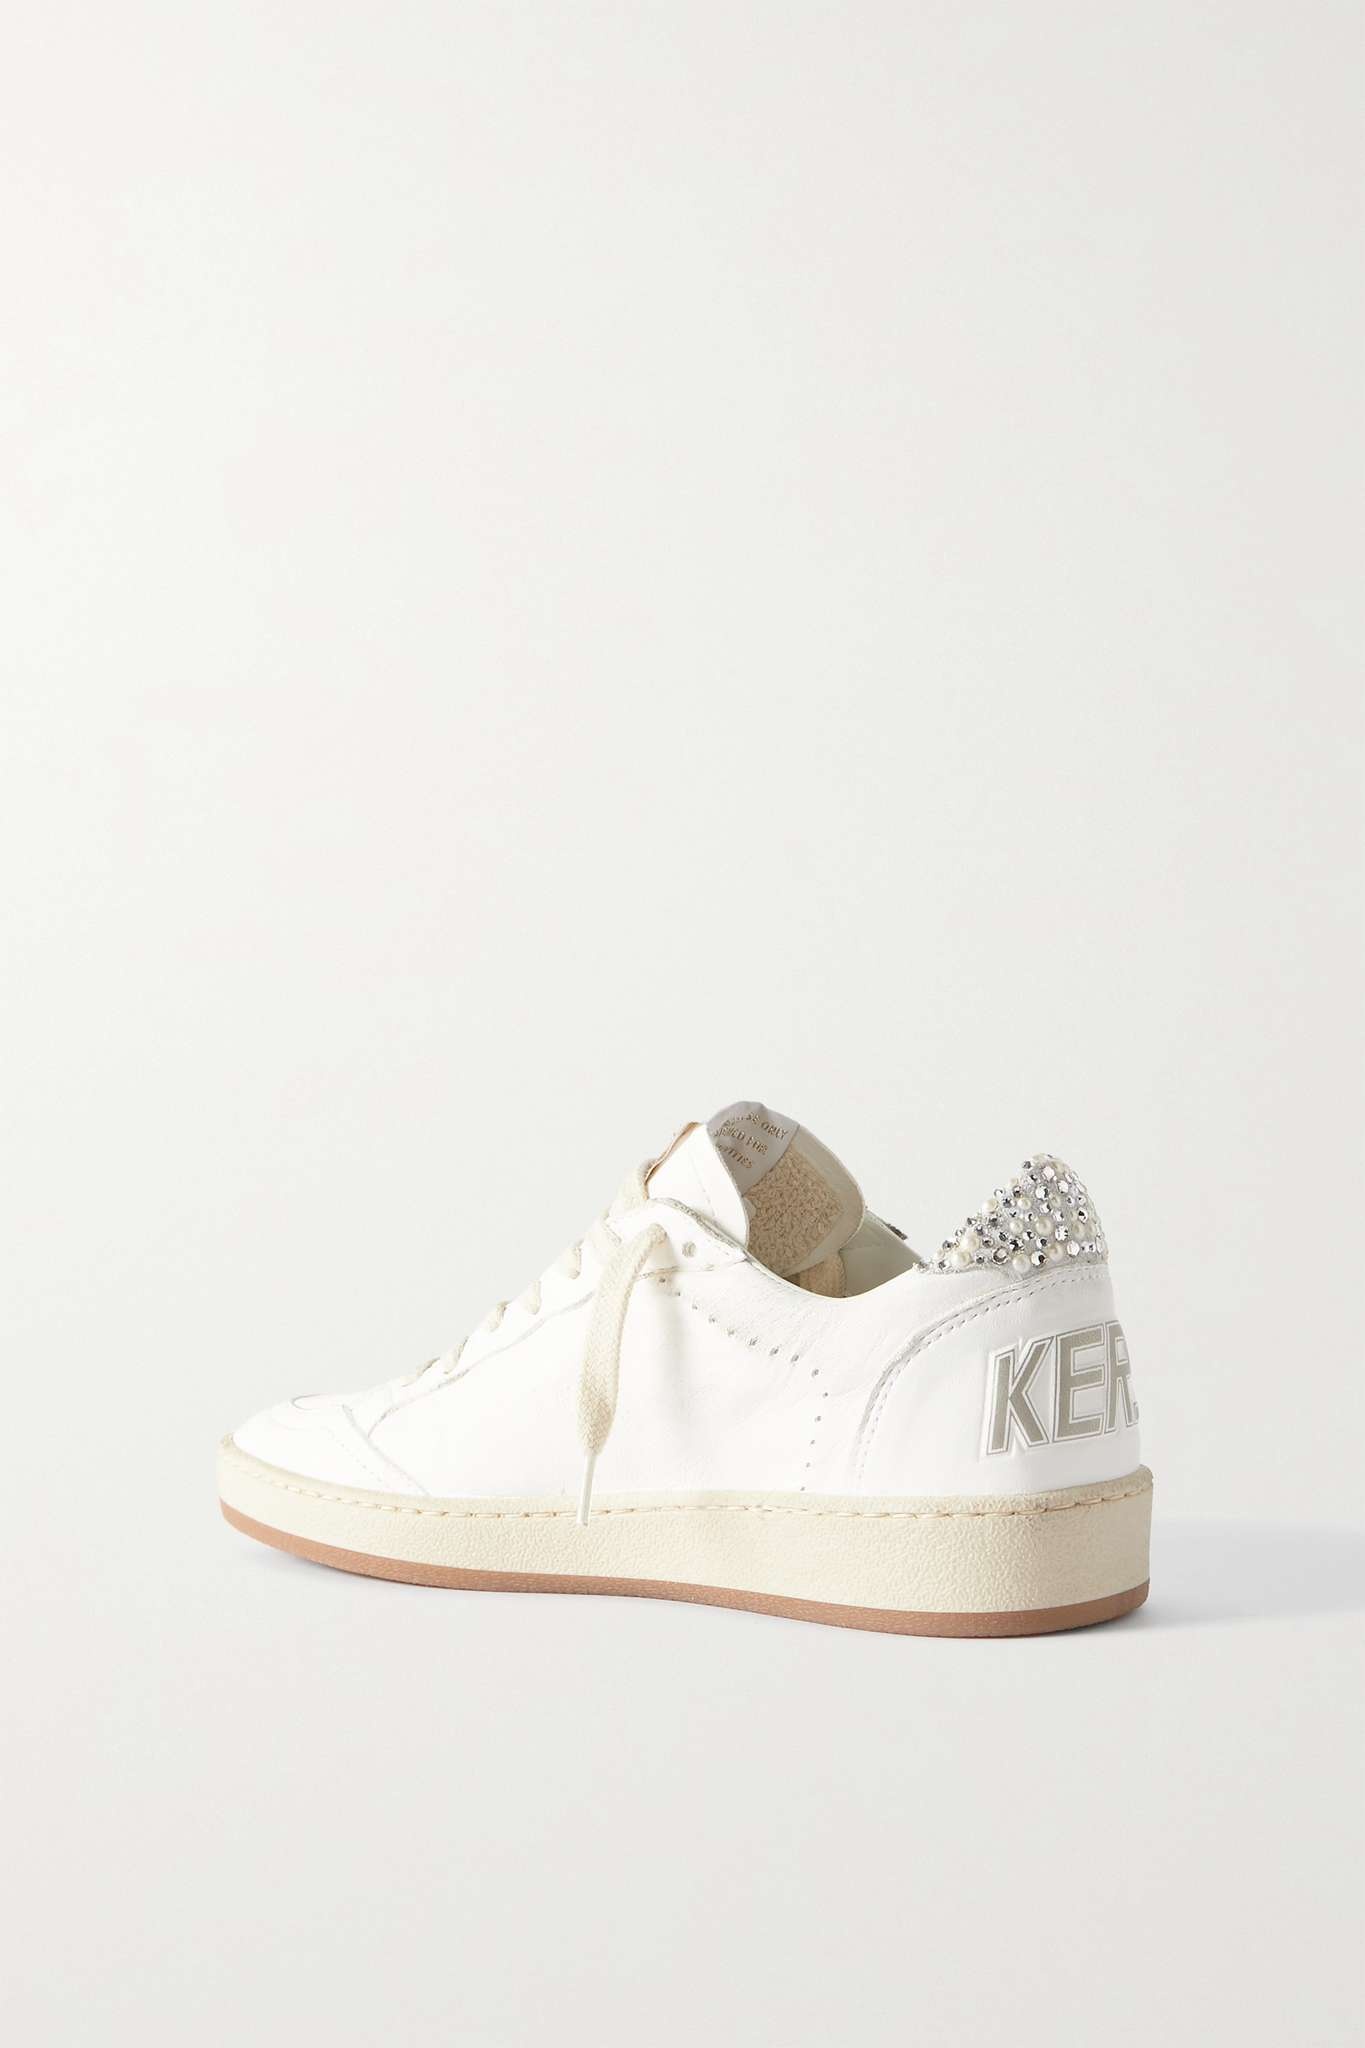 Ball Star shearling-lined embellished distressed leather sneakers - 3